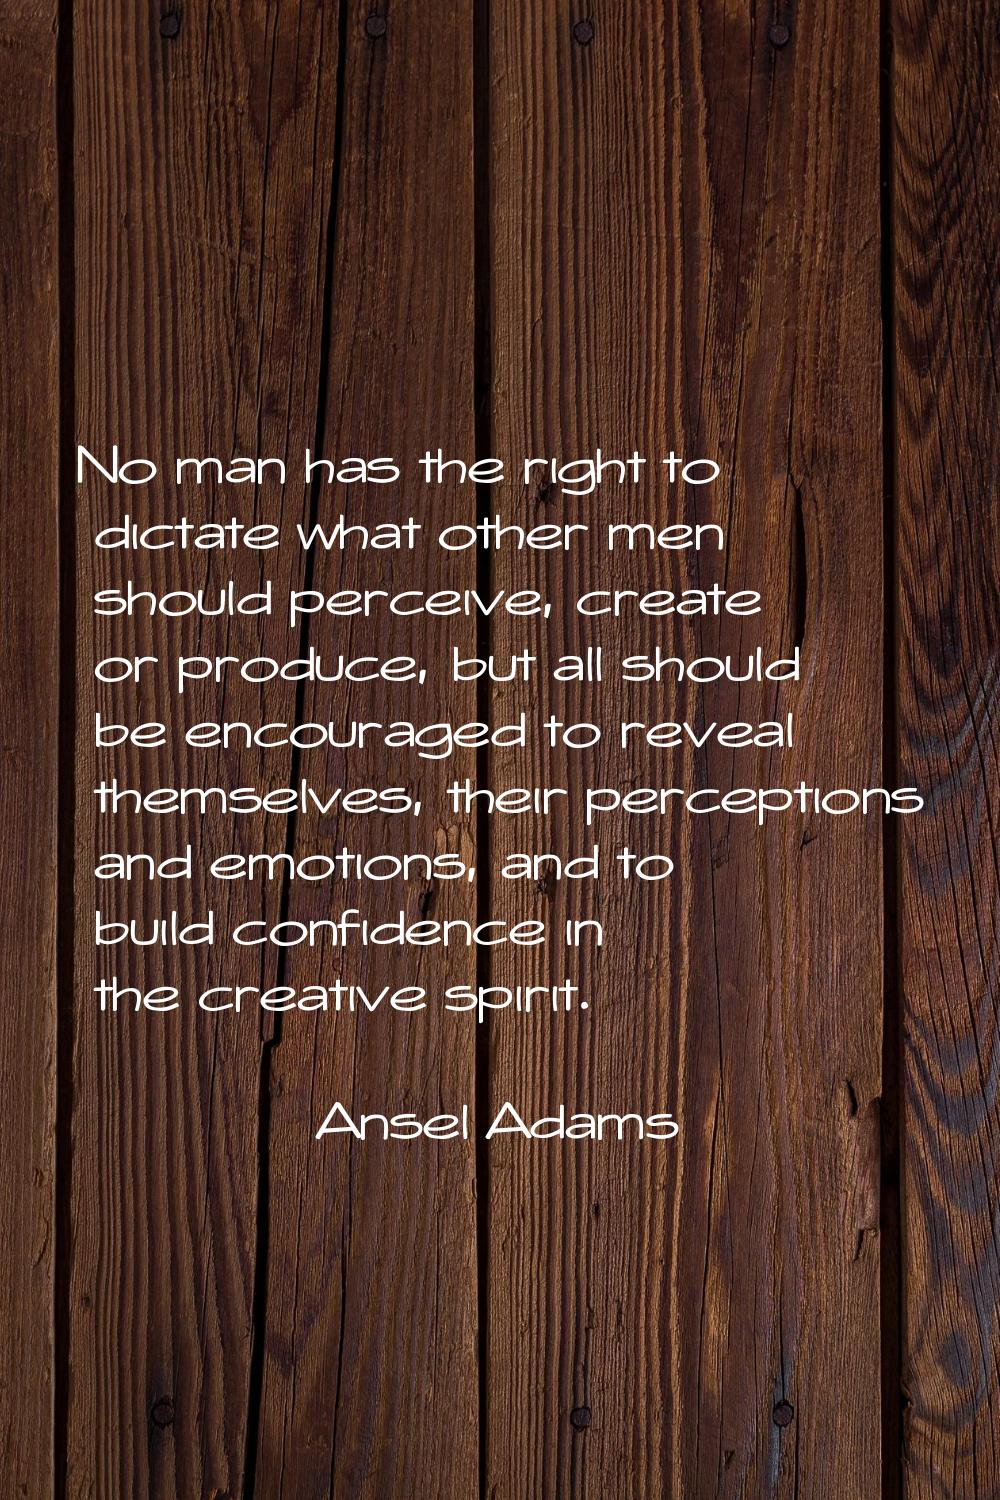 No man has the right to dictate what other men should perceive, create or produce, but all should b